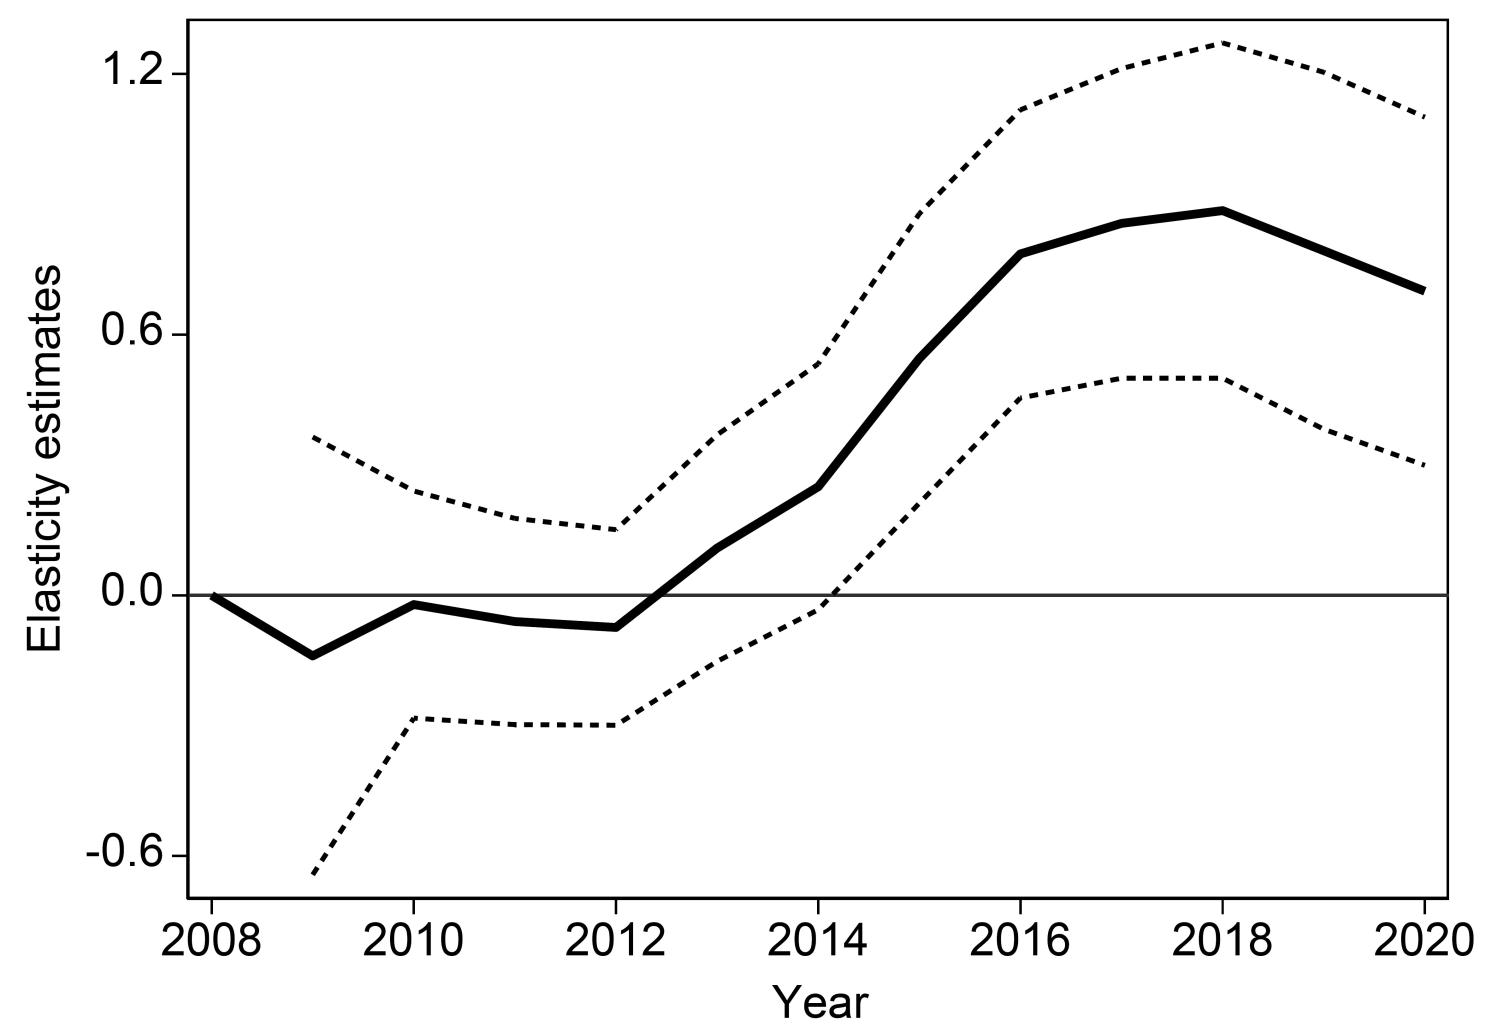 Figure 4 Relationship between fentanyl overdose deaths and imports